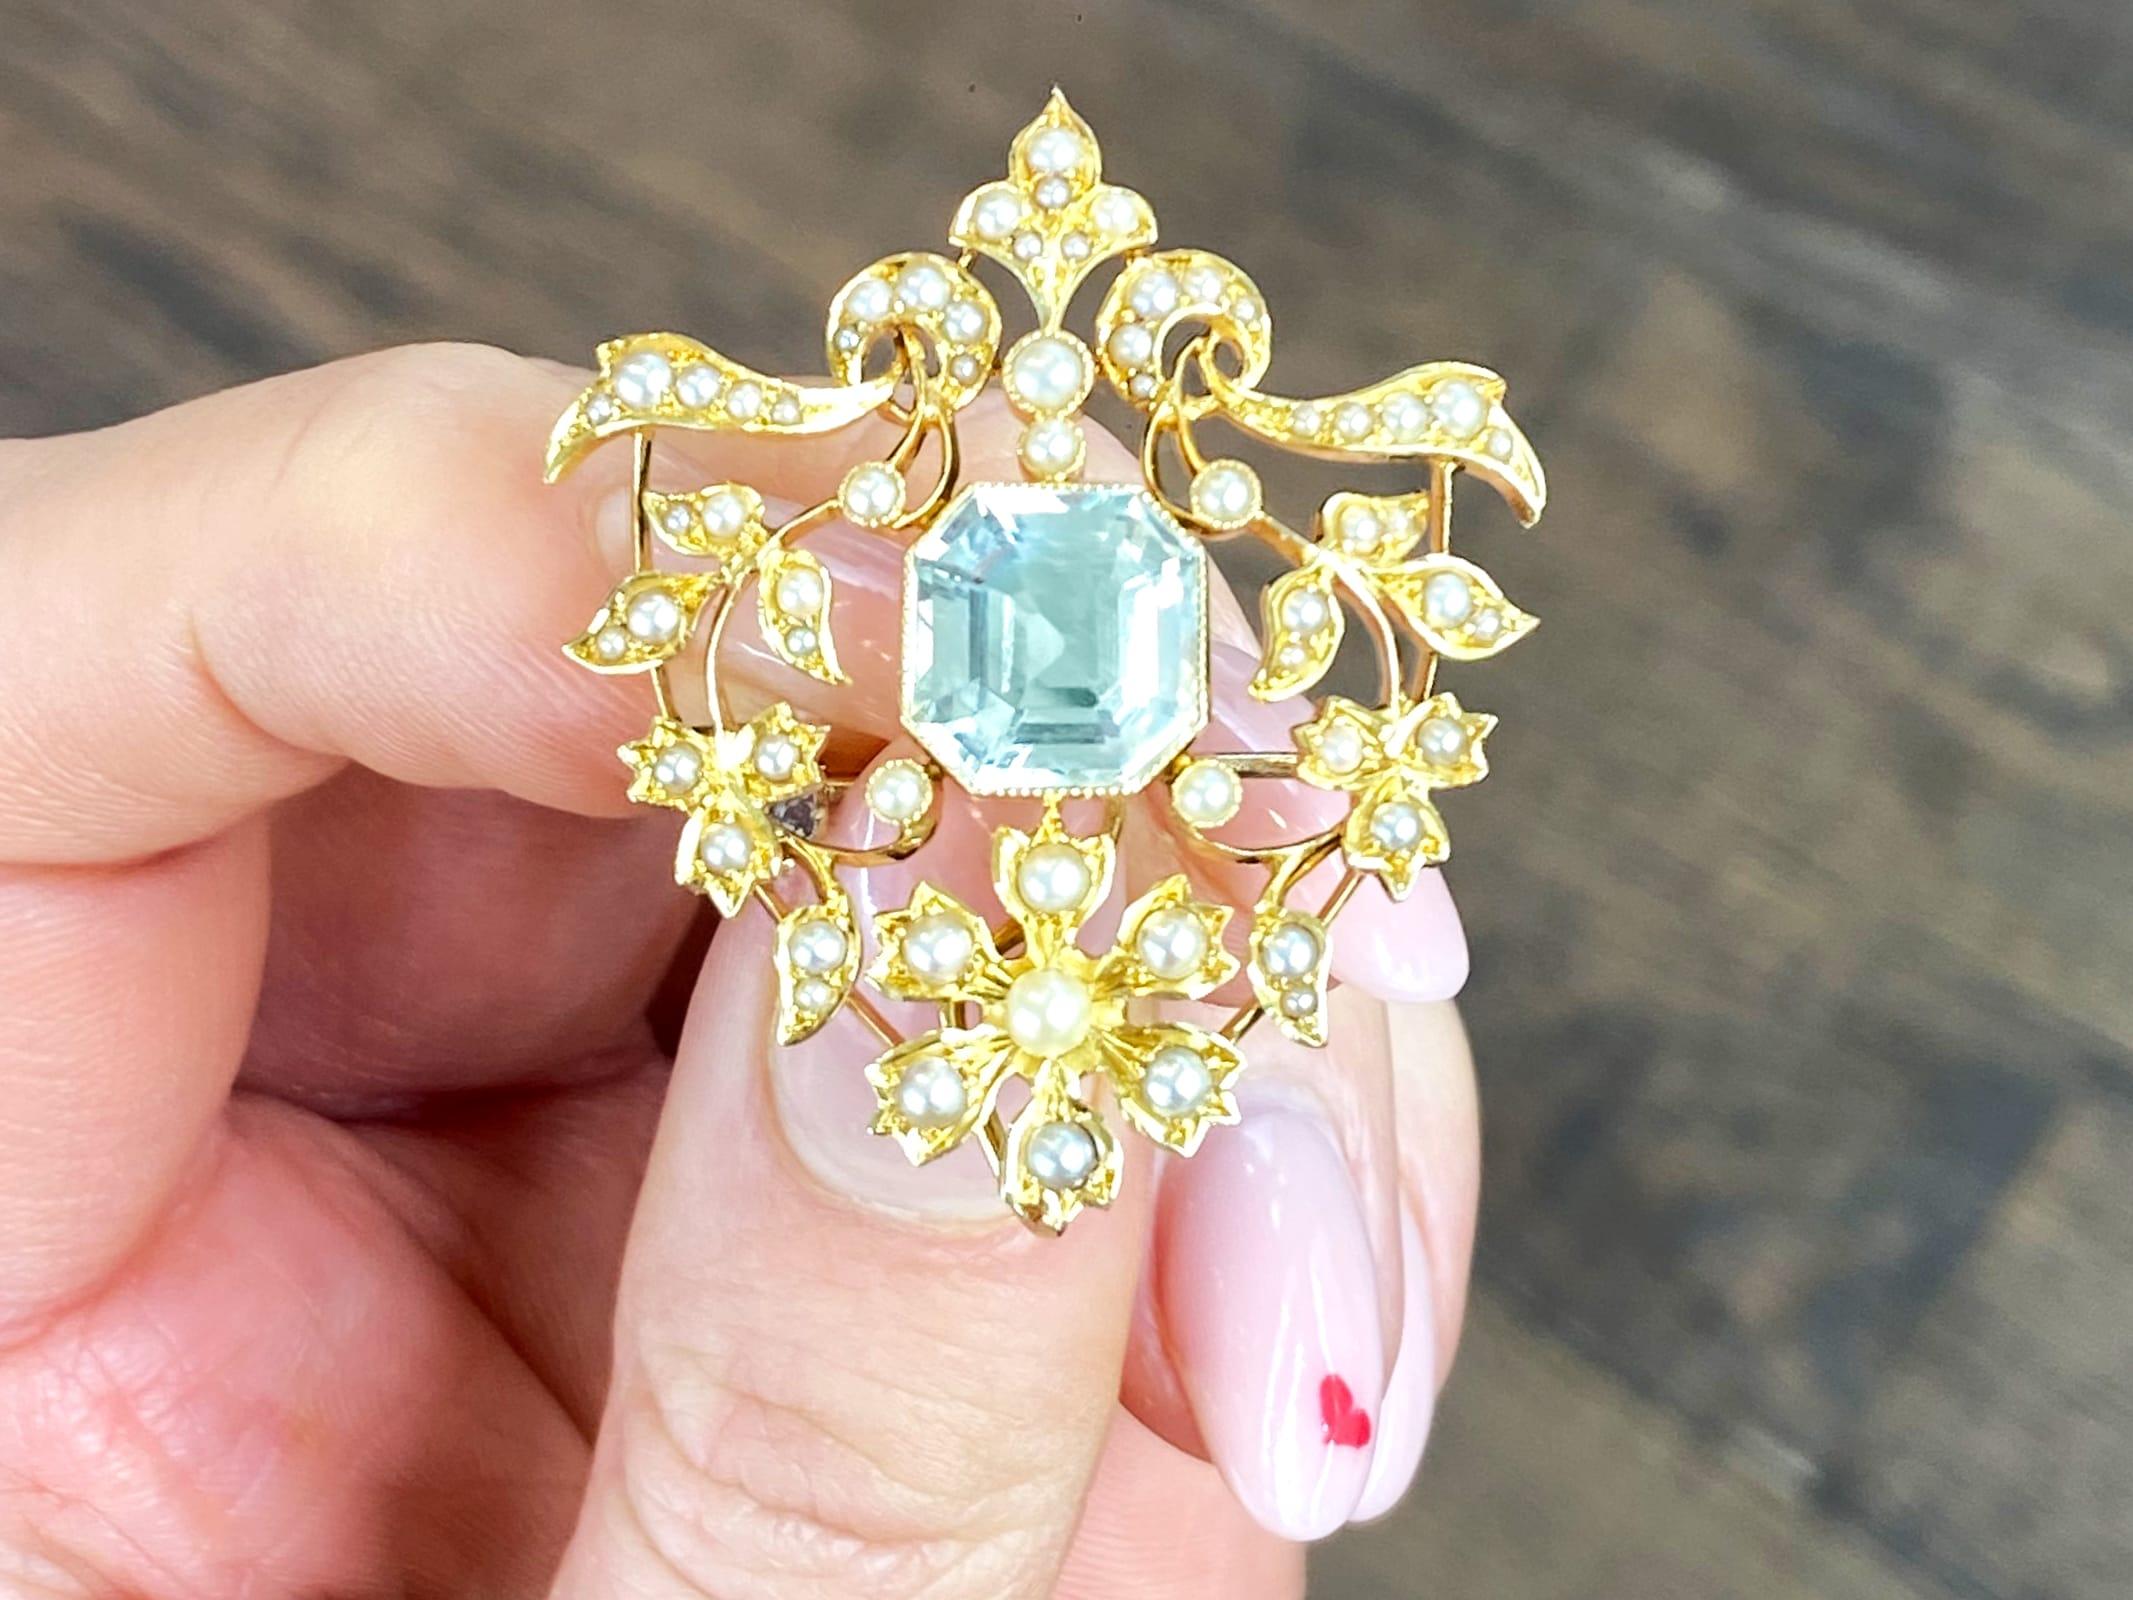 A stunning, fine and impressive antique 4.10 carat aquamarine and seed pearl, 15 karat yellow gold pendant / brooch; part of our diverse Victorian jewelry collections.

This stunning, fine and impressive antique Victorian brooch/pendant has been